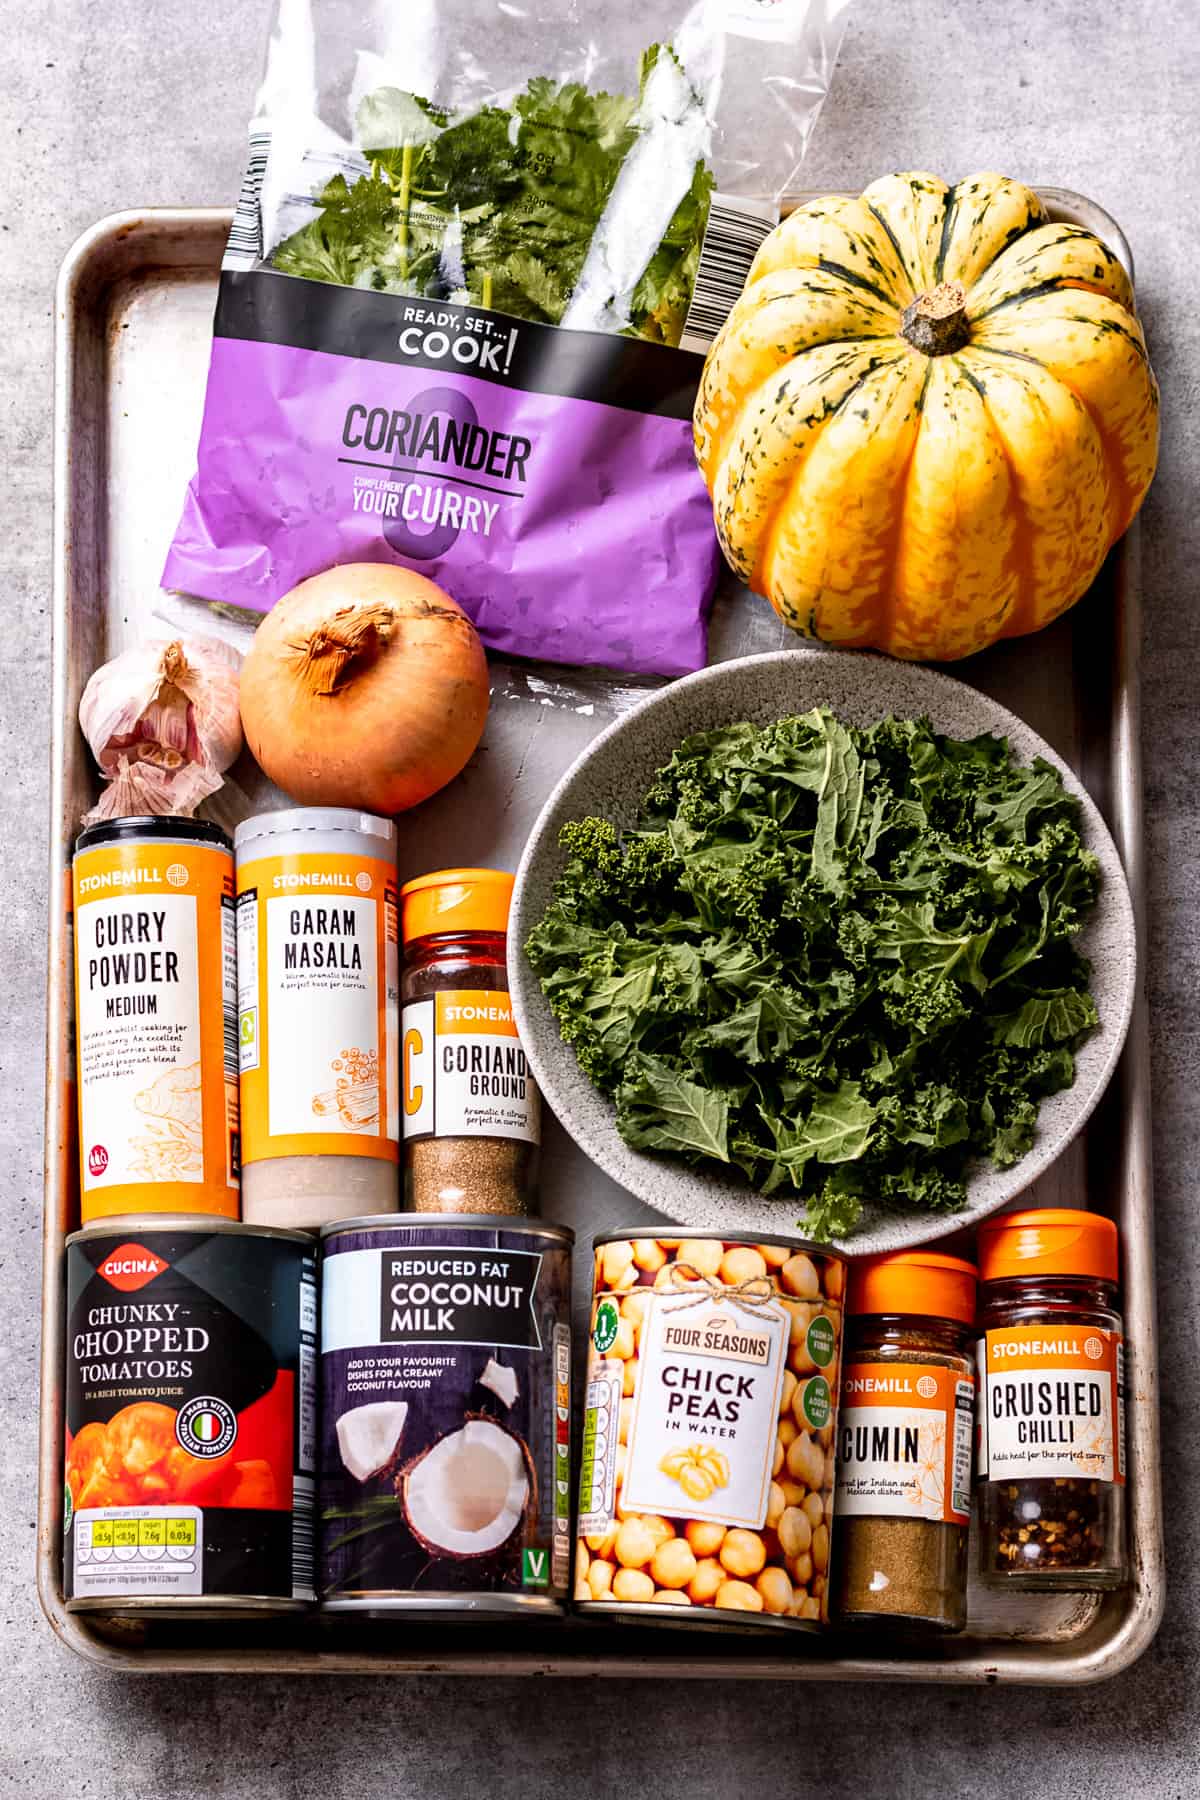 Aldi ingredients for butternut squash curry with chickpeas.